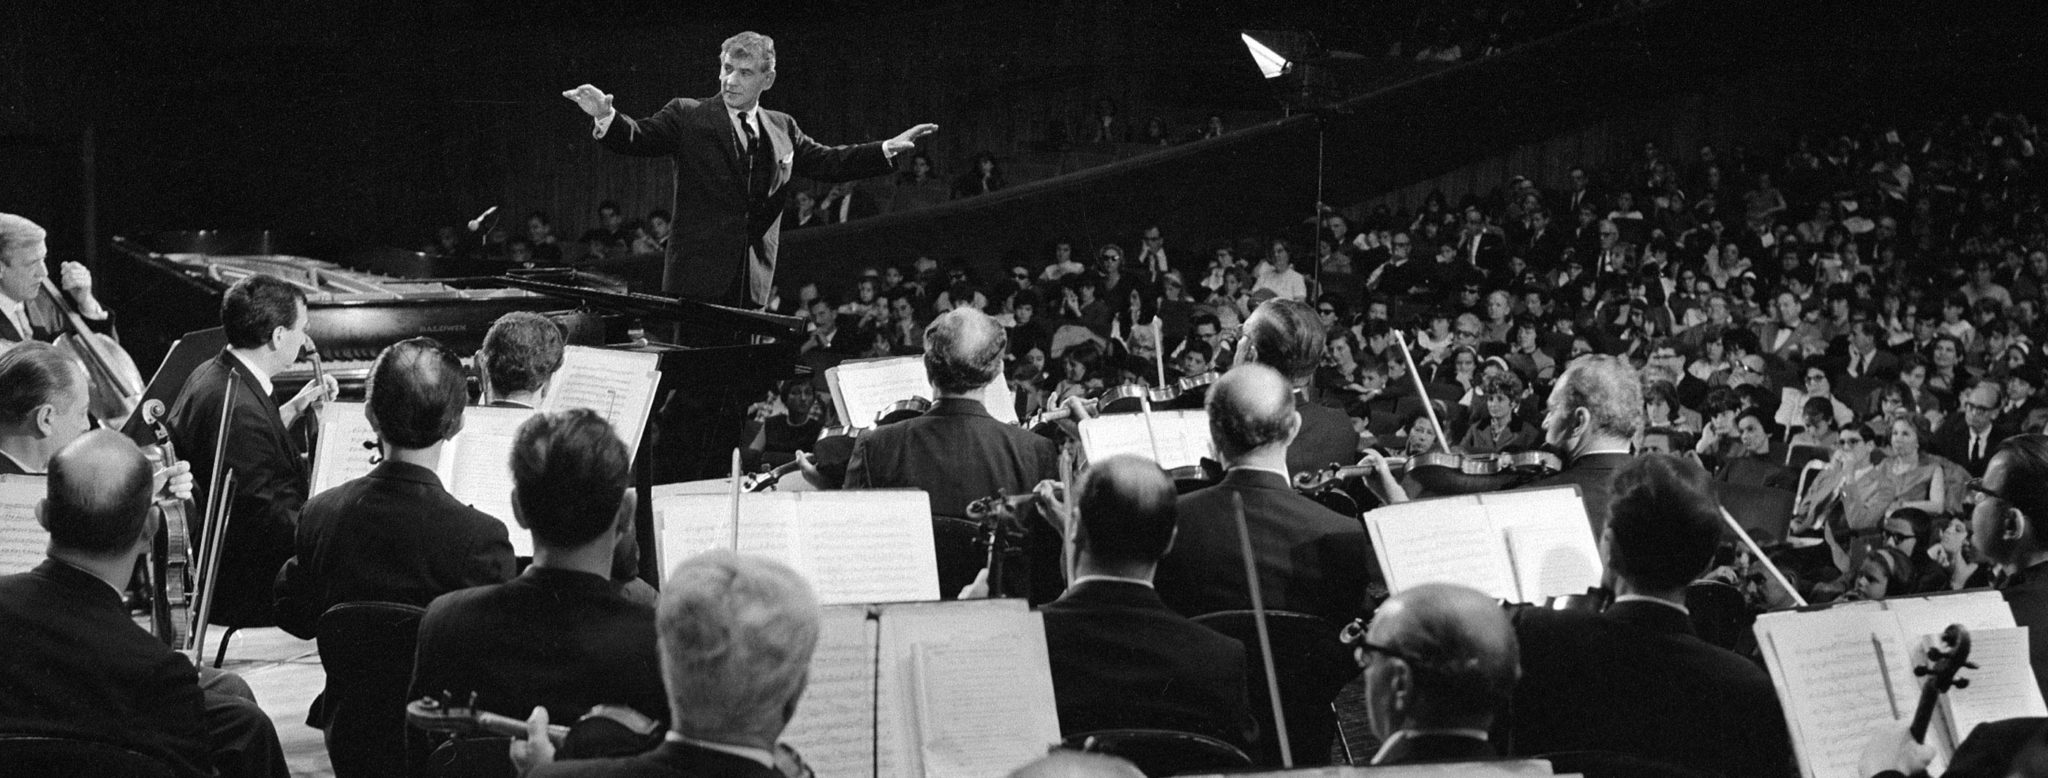 Leonard Bernstein conducting a New York Philharmonic Young People's Concert, October 23, 1965. (Credit: CBS/Getty Images)